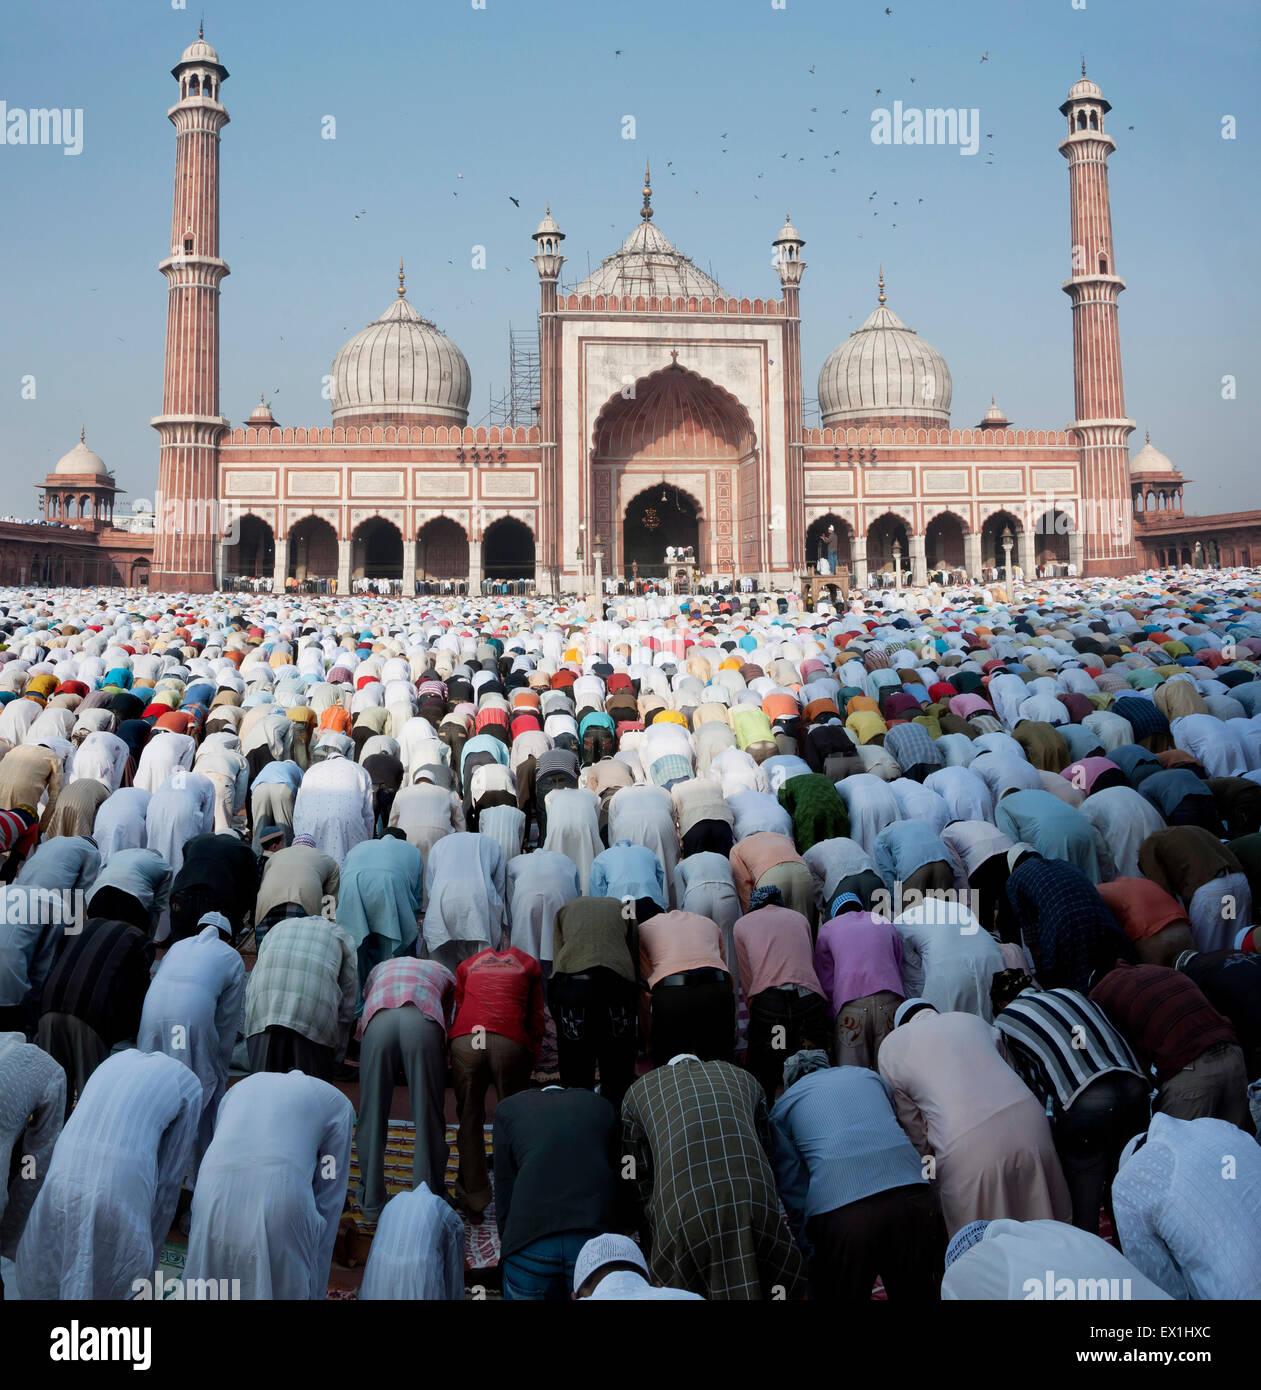 People offering prayers during the festival of Eid-ul-fitr at the Jama Masjid mosque in old Delhi, India. Stock Photo